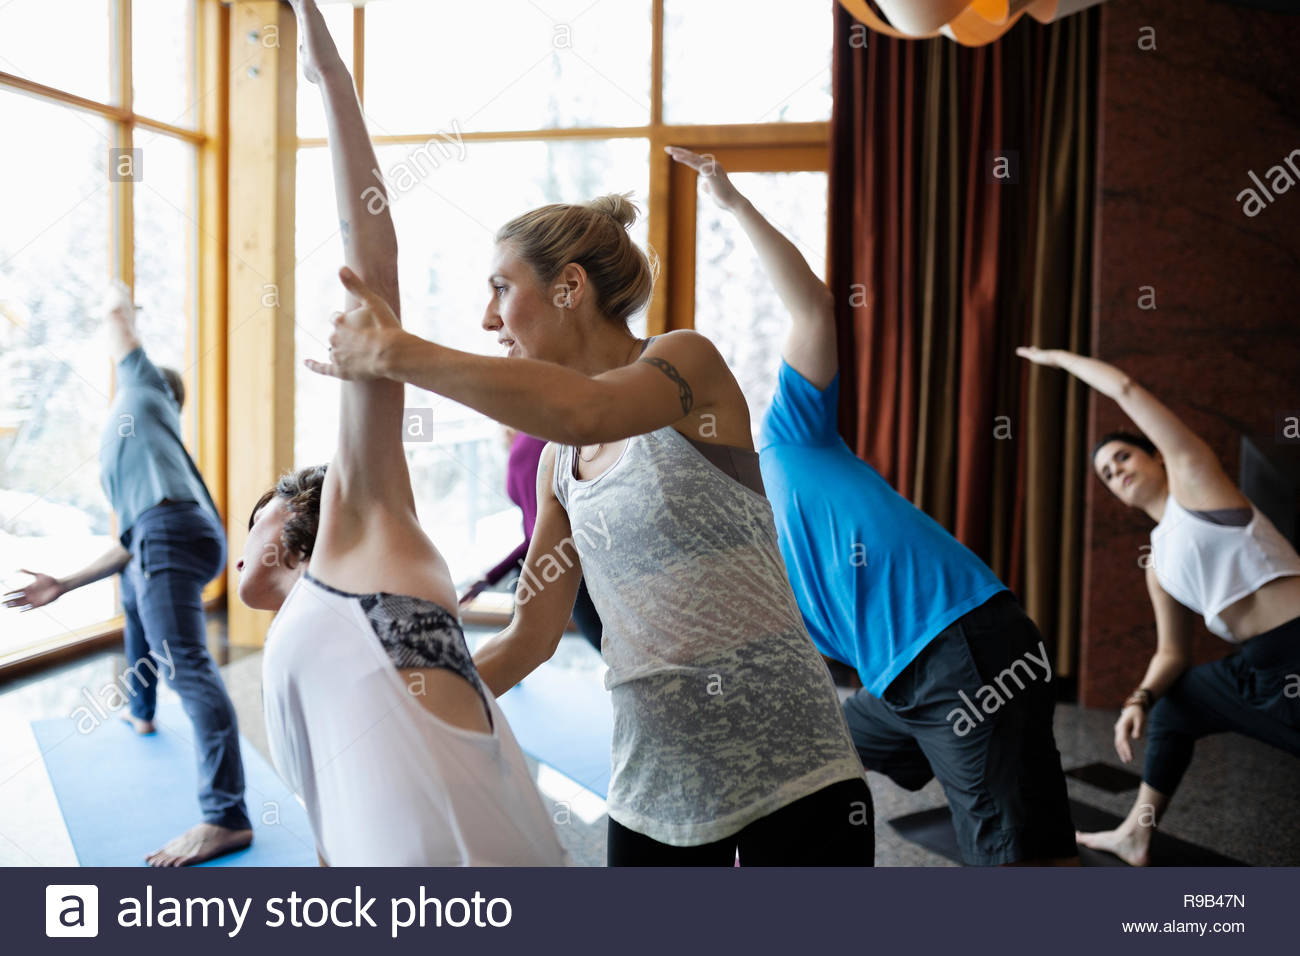 Instructor supporting woman practicing side angle pose in yoga class studio Stock Photo